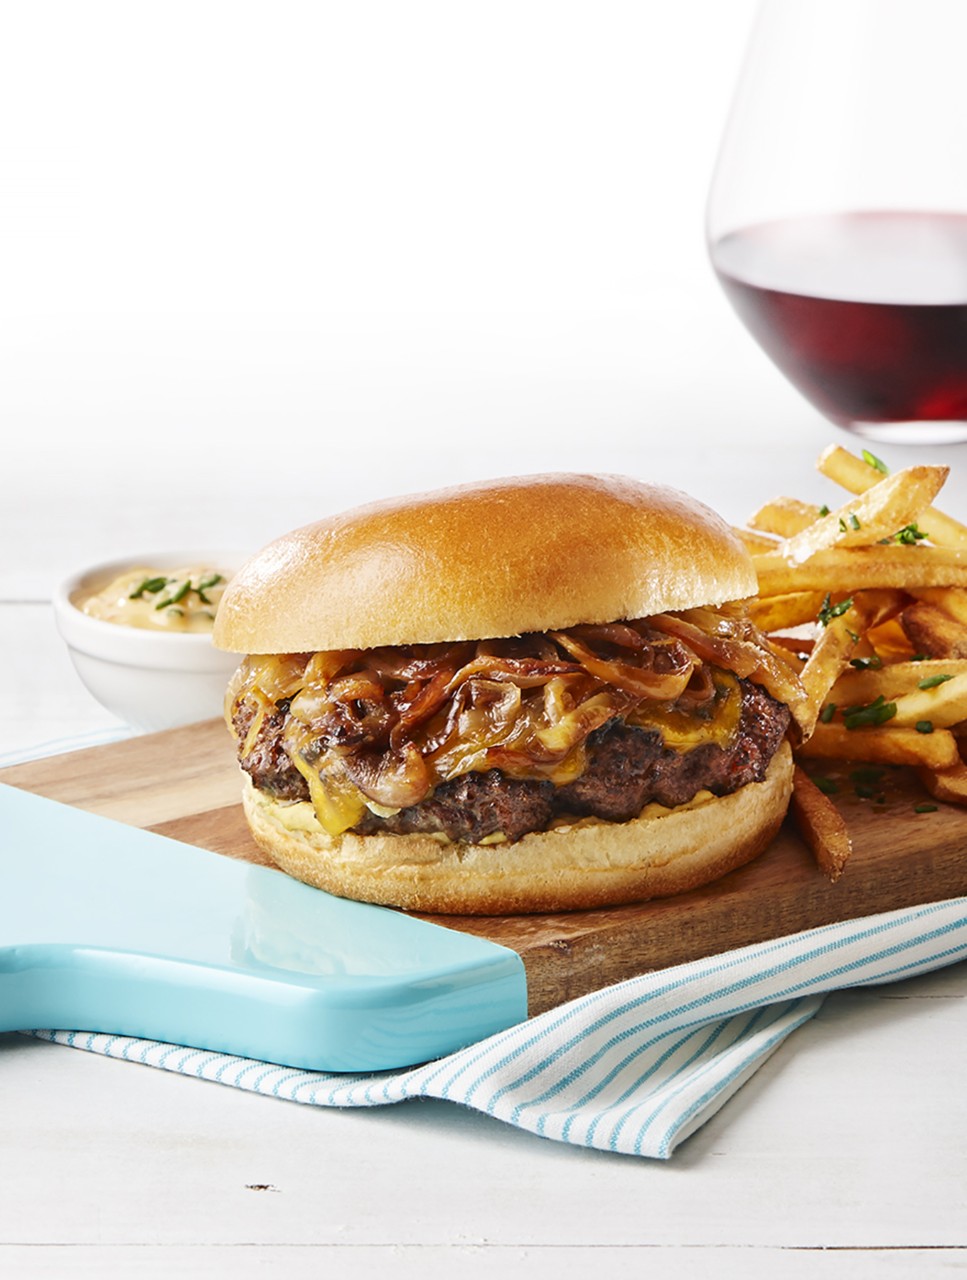 Classic Canadian Burger with Beer-Braised Onions and Cheddar